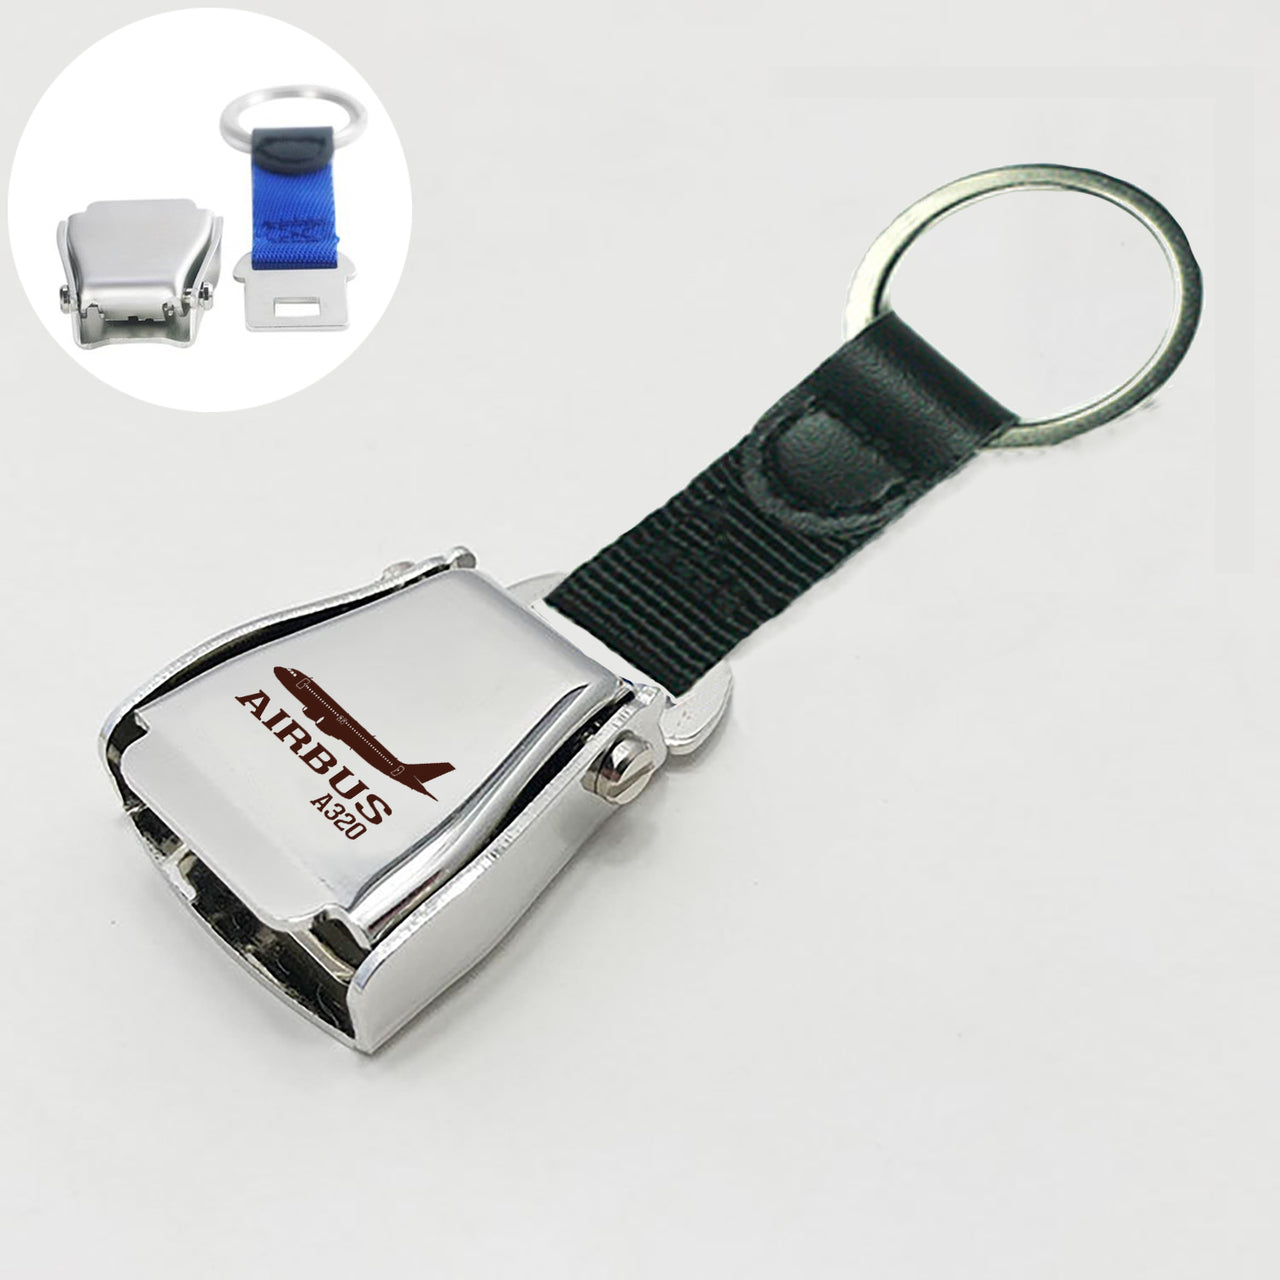 Airbus A320 Printed Designed Airplane Seat Belt Key Chains